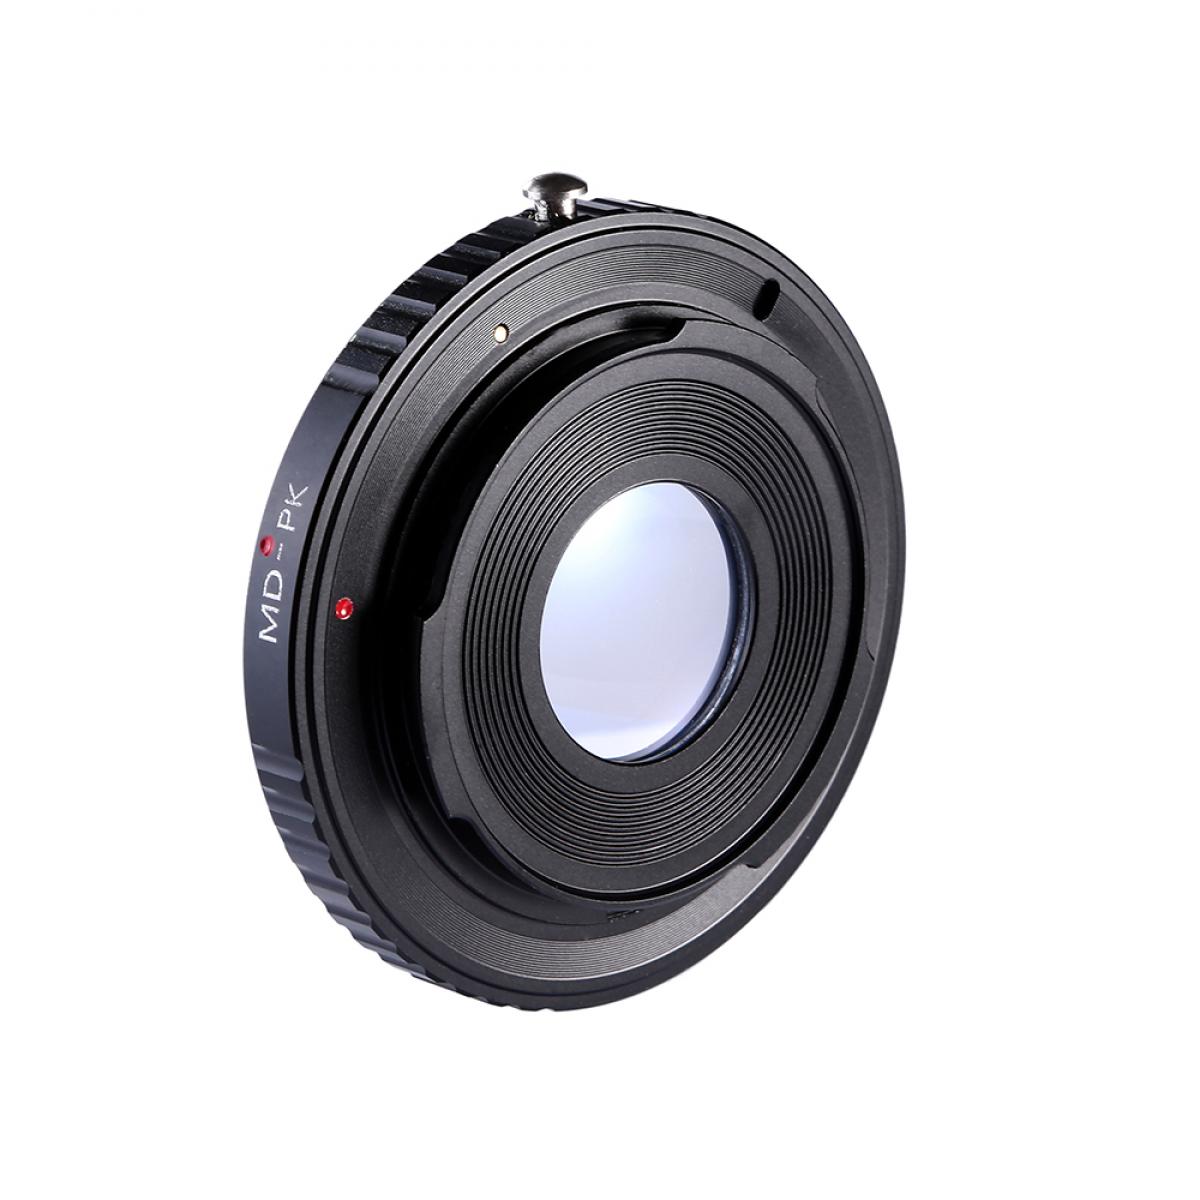 Minolta MD Lenses to Pentax K Camera Mount Adapter with Optic Glass